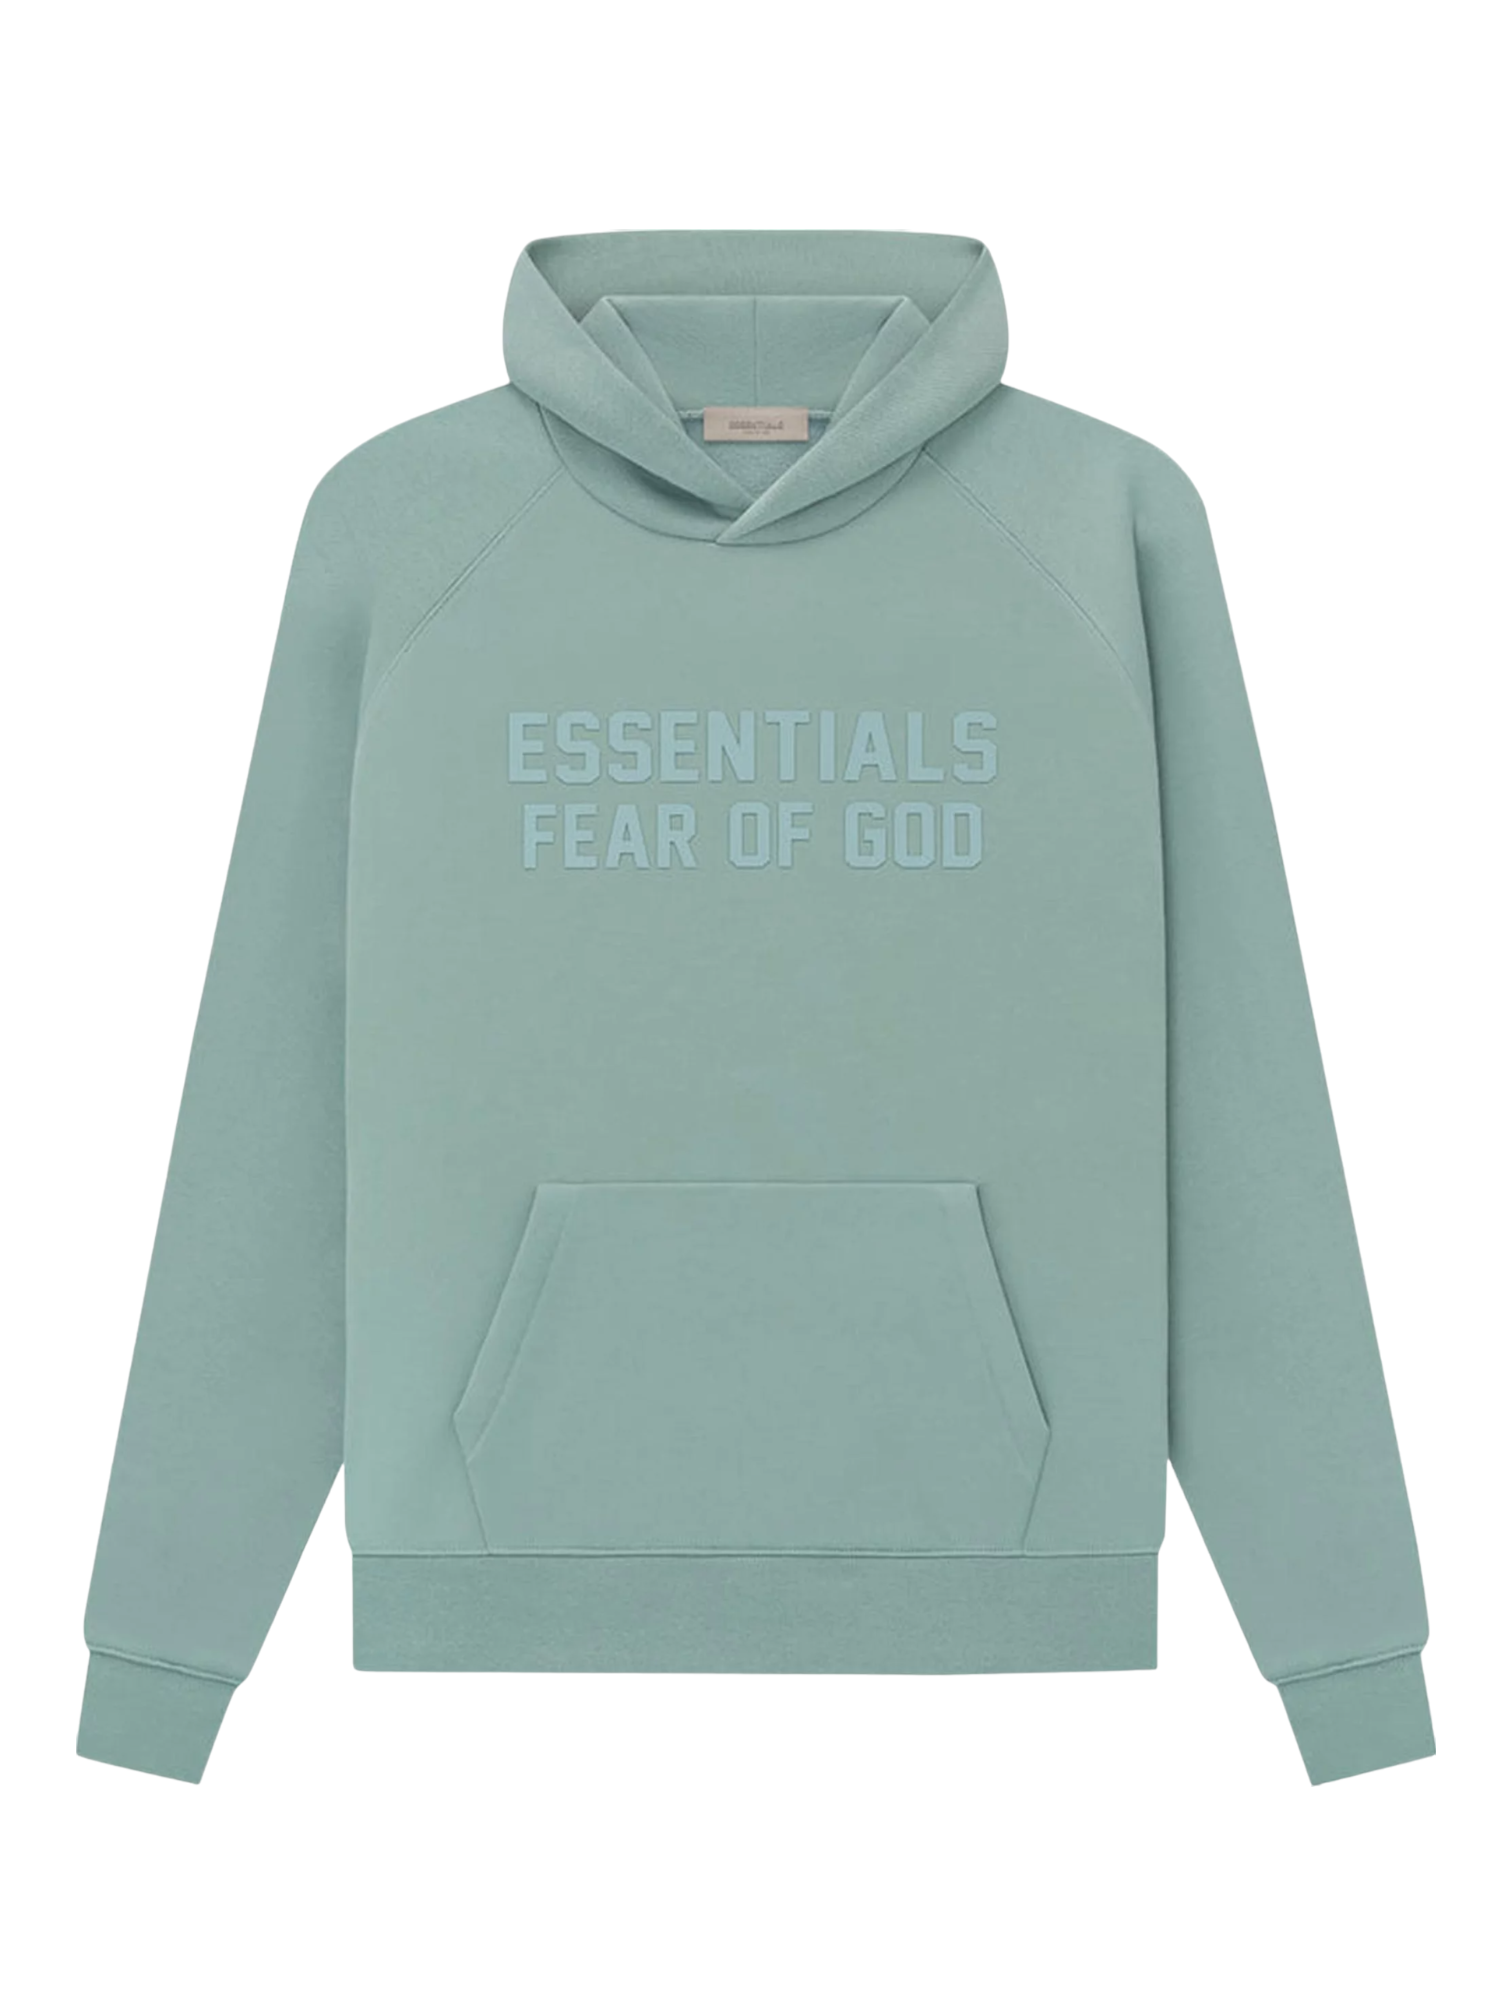 Essentials Fear of God Sycamore Fleece Hoodie SS23